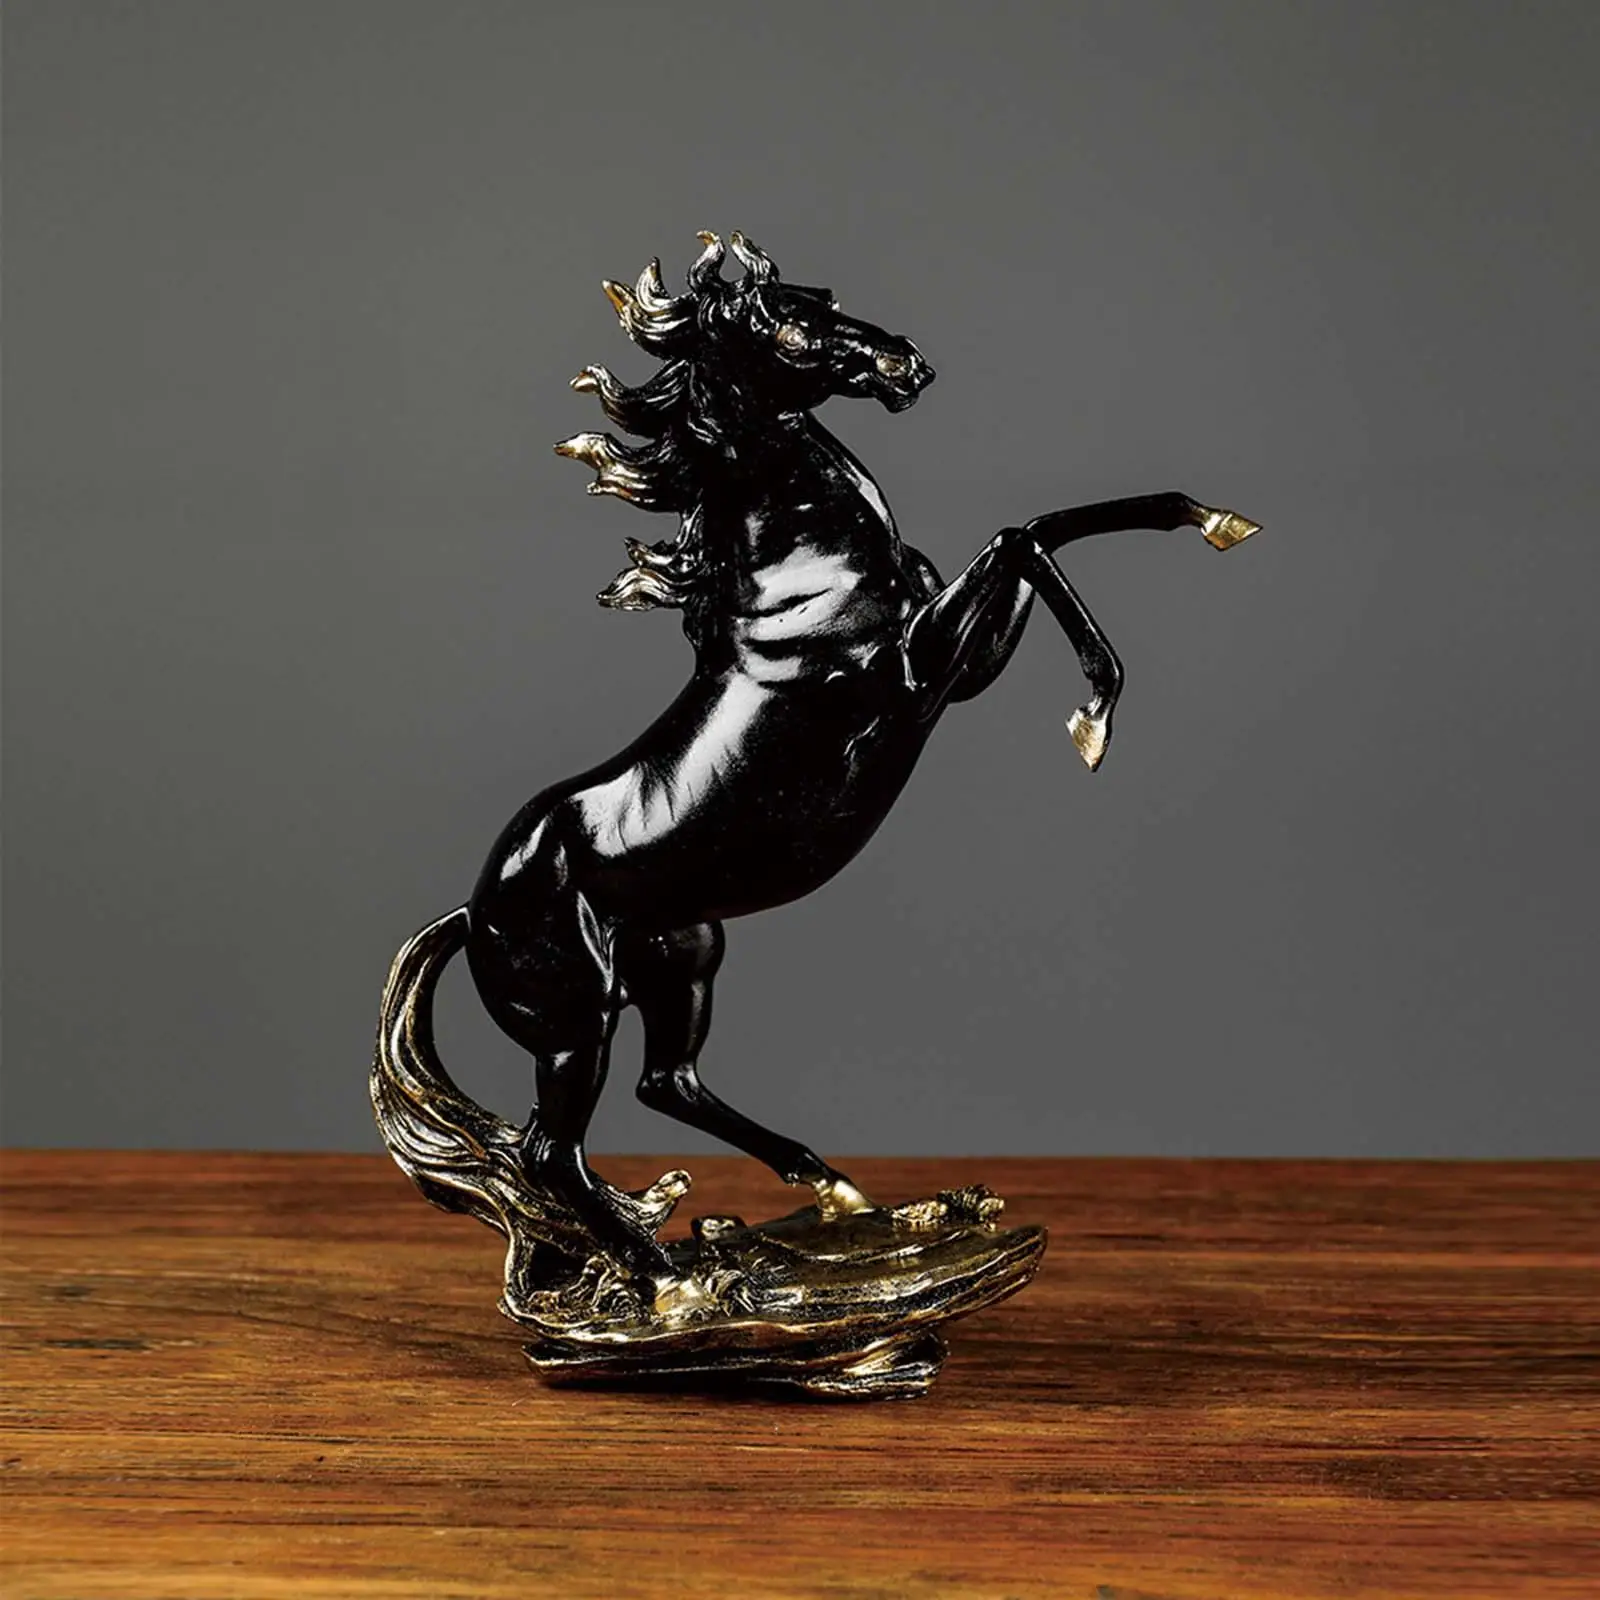 Horse Statue Resin Figurine Animal Sculpture for Home Decoration Gift